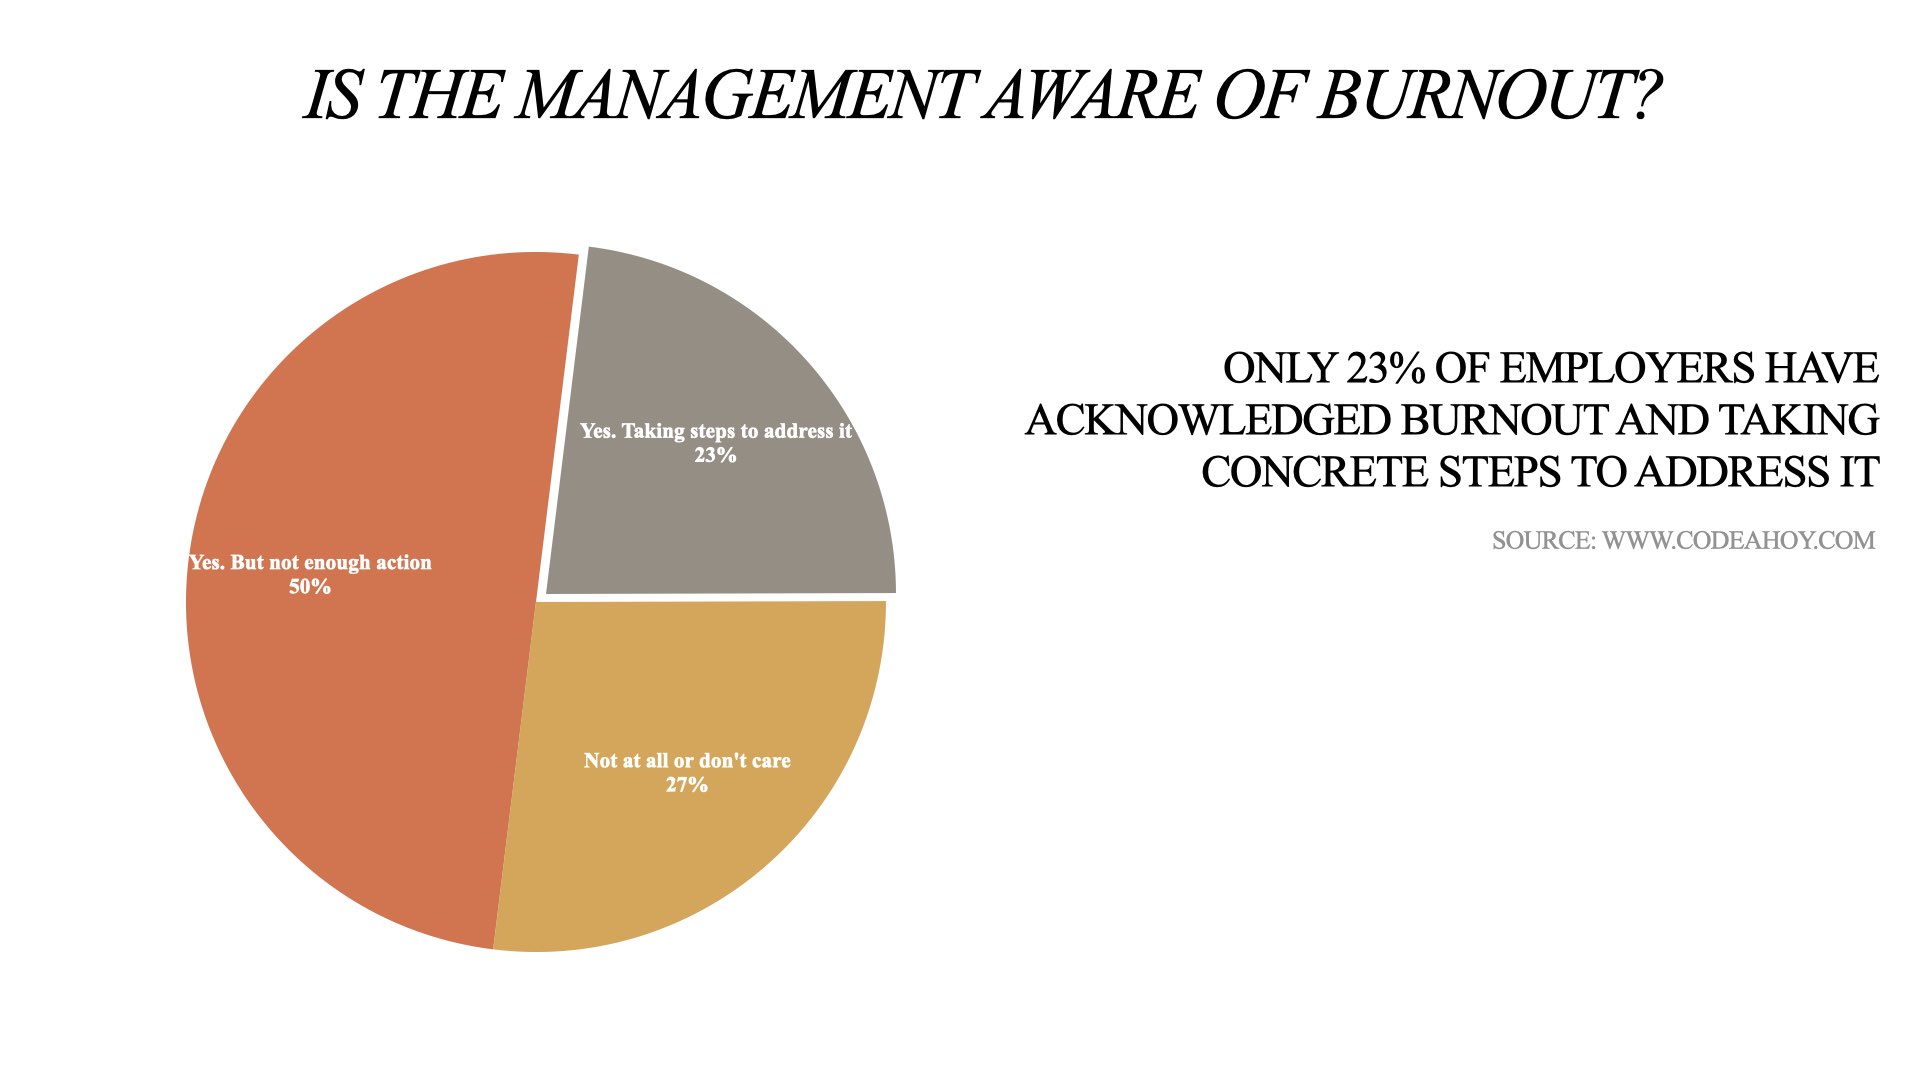 Software developers burnout survey chart and stats - 5